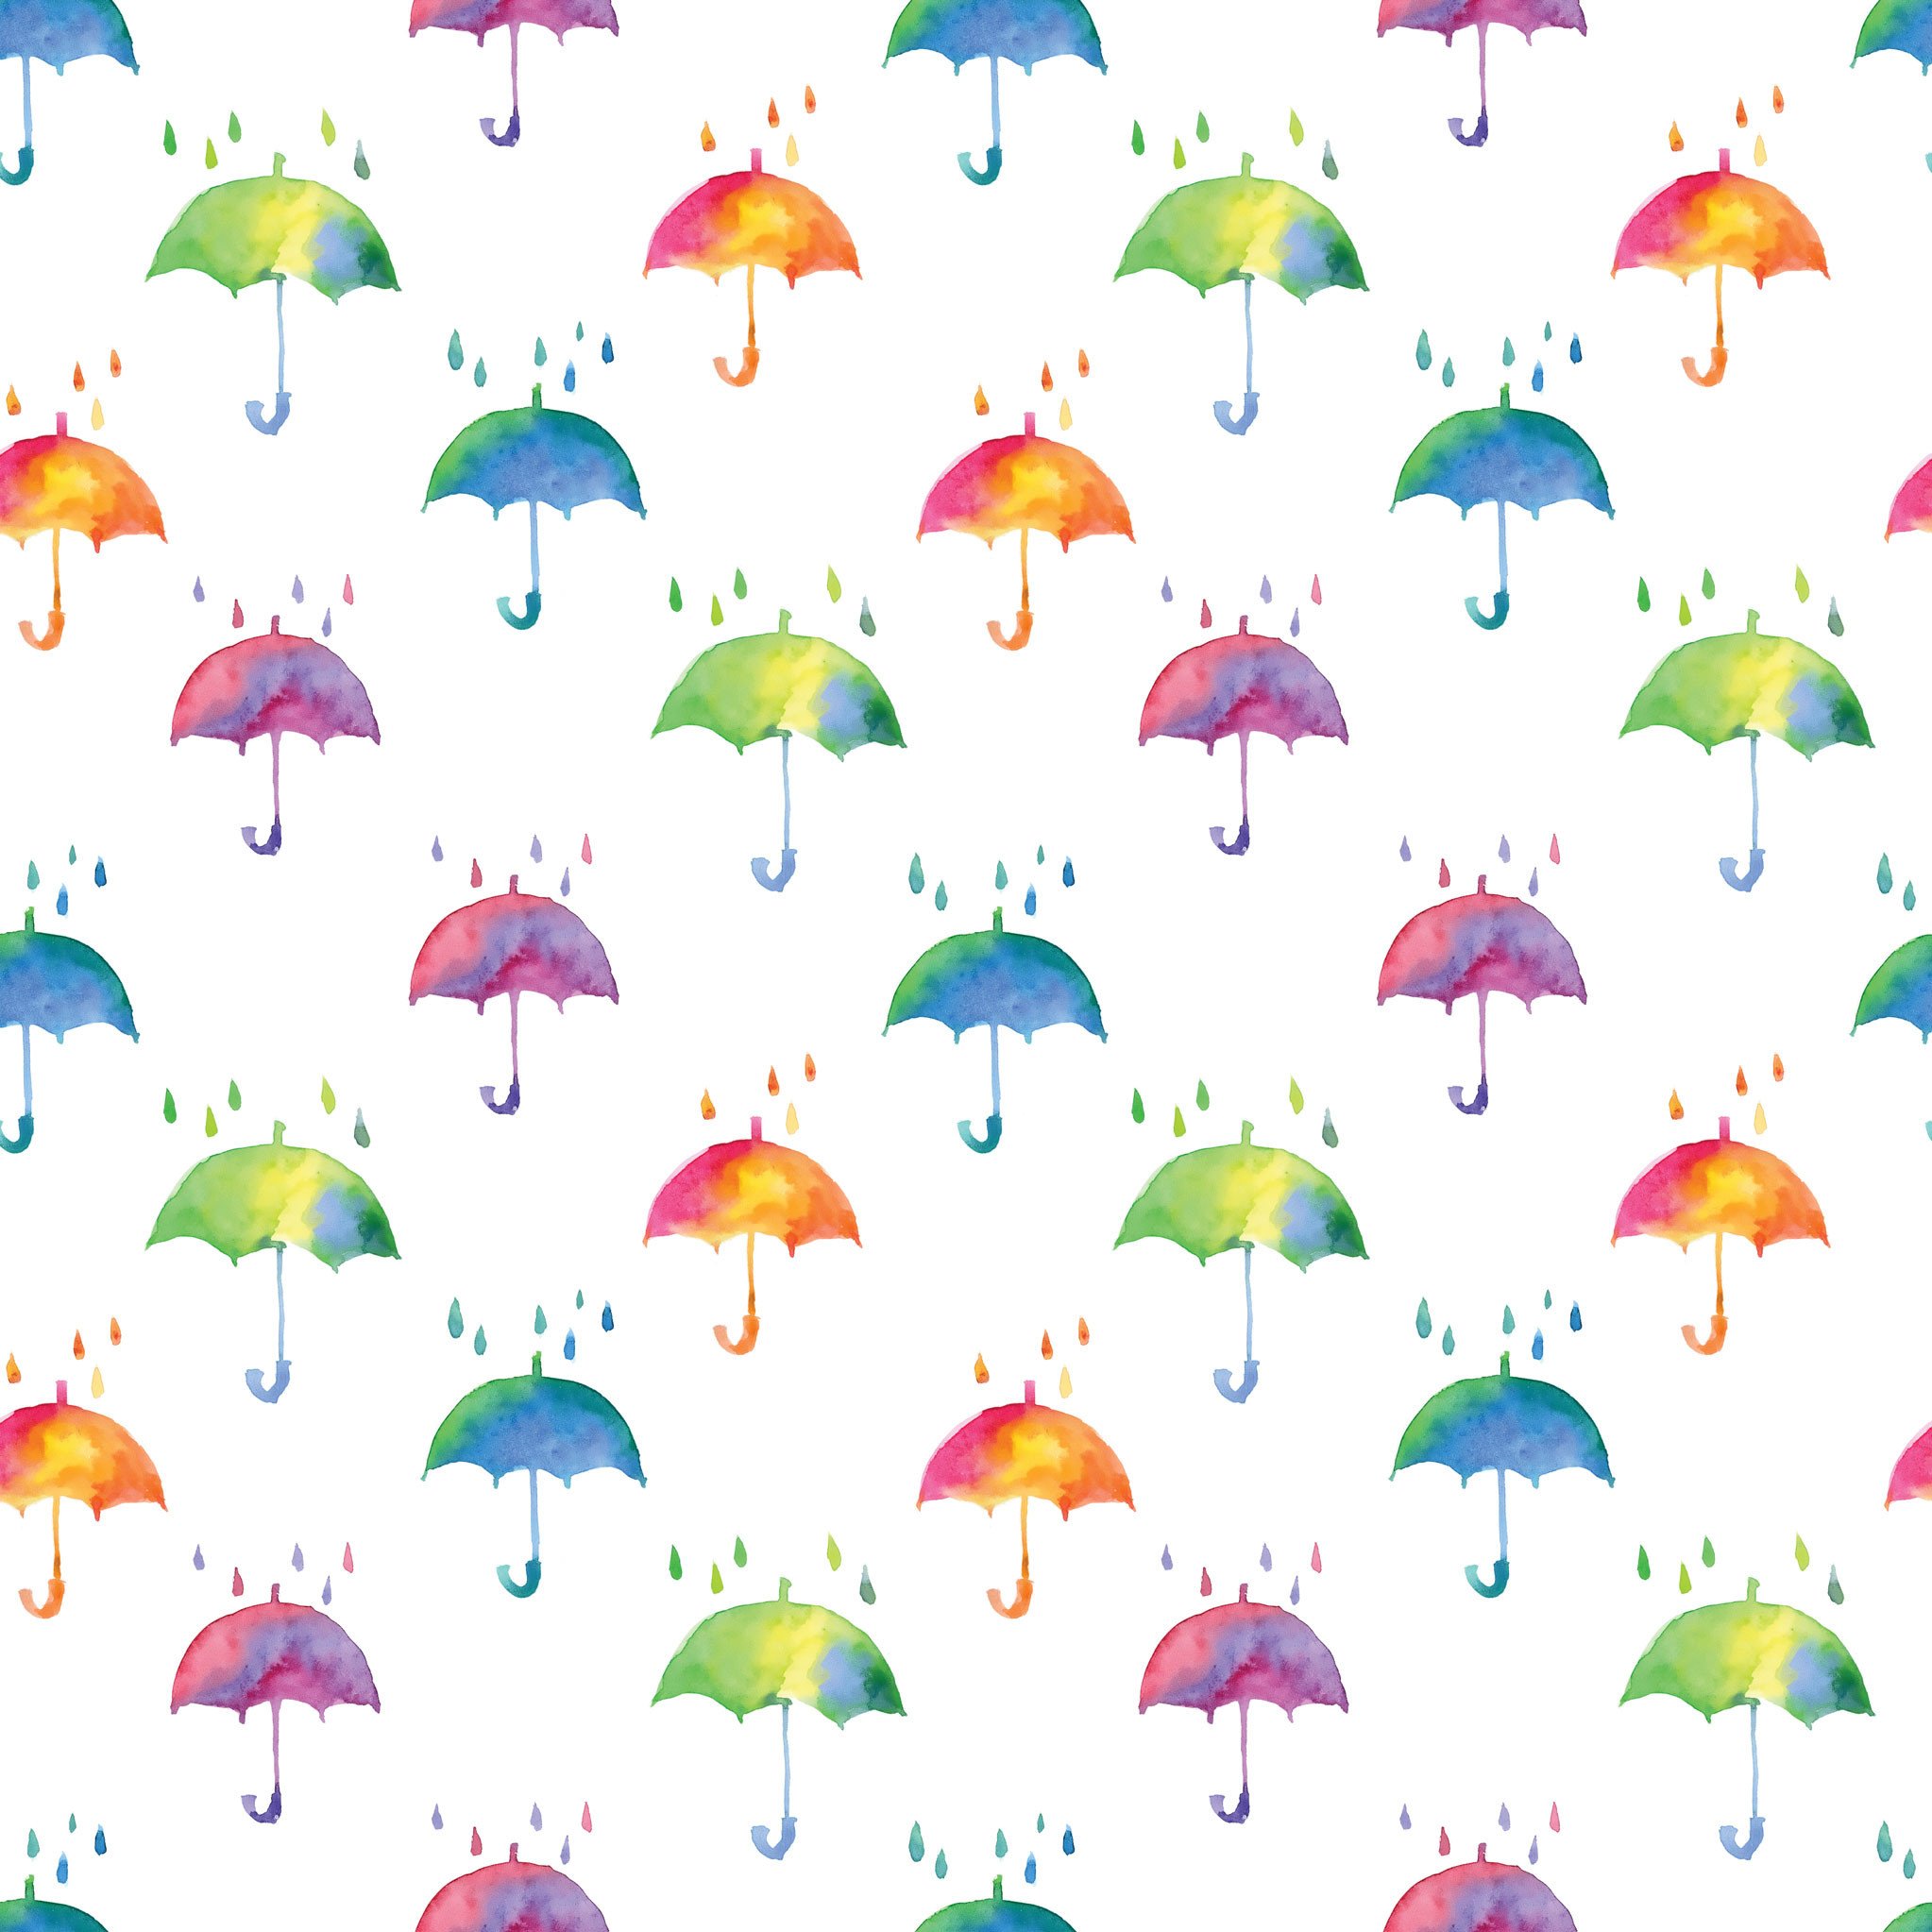 April Showers Photo Background. April showers, Photo background, May flowers